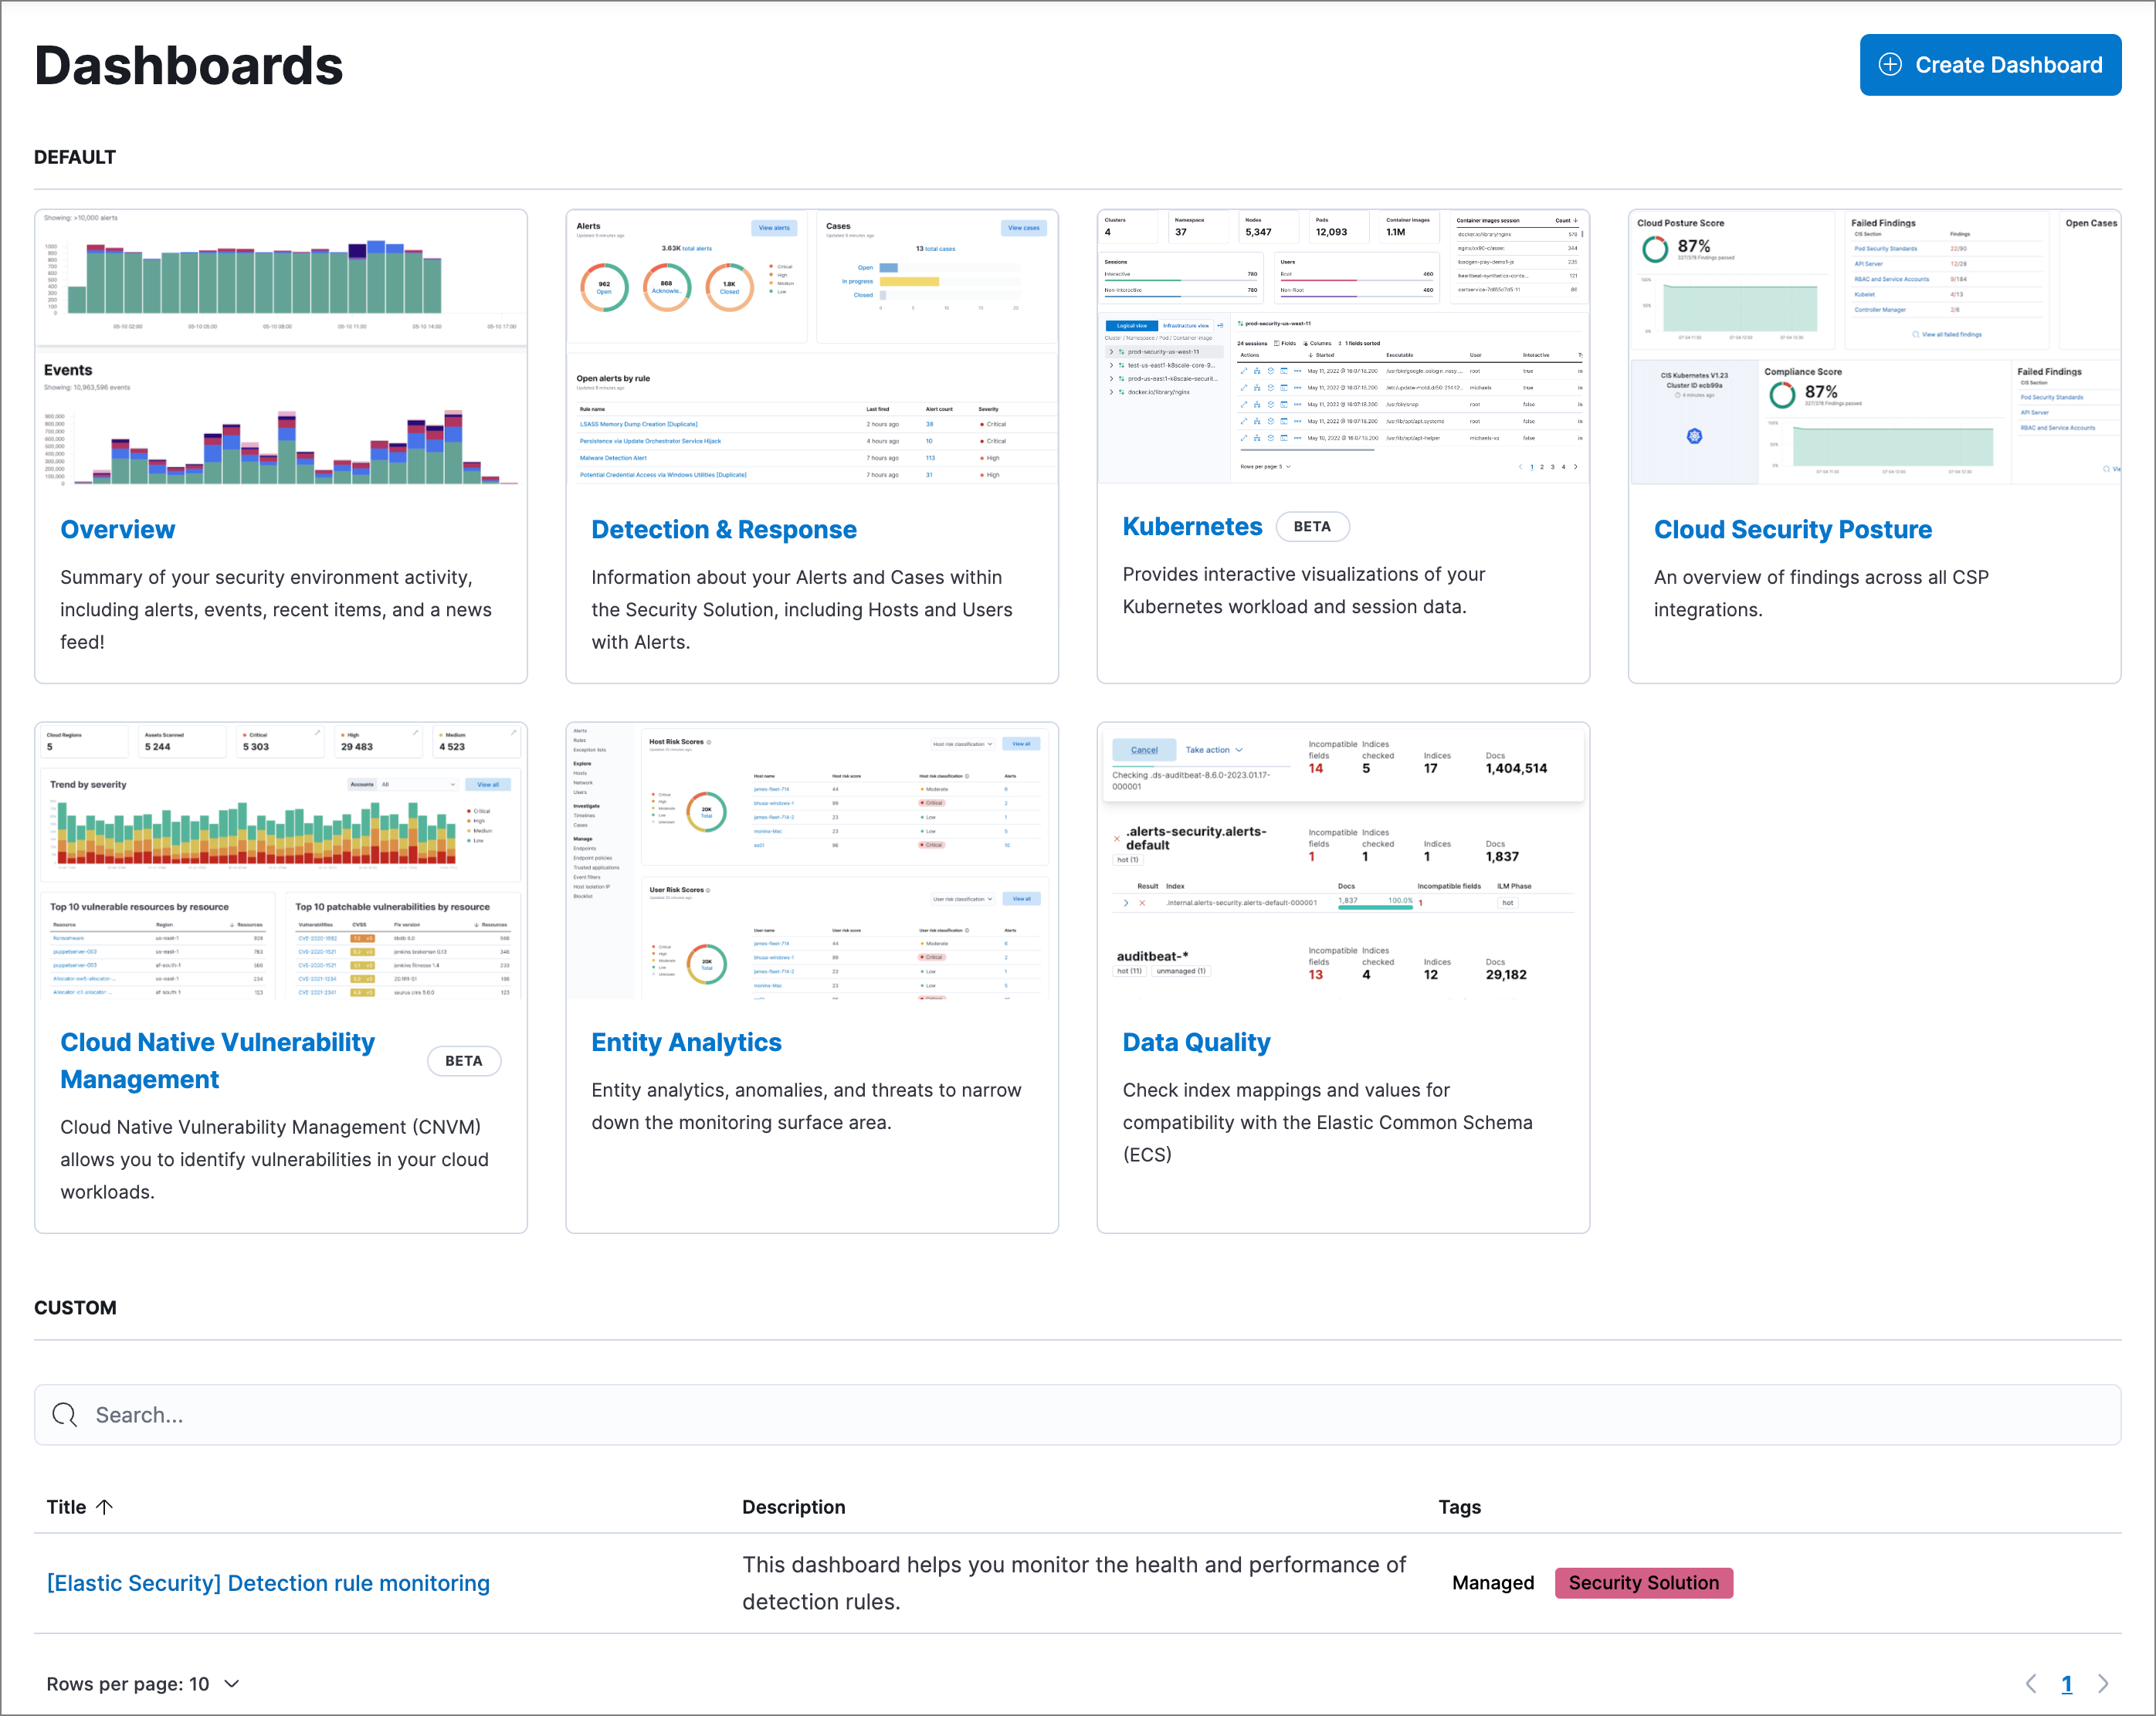 The Dashboards landing page